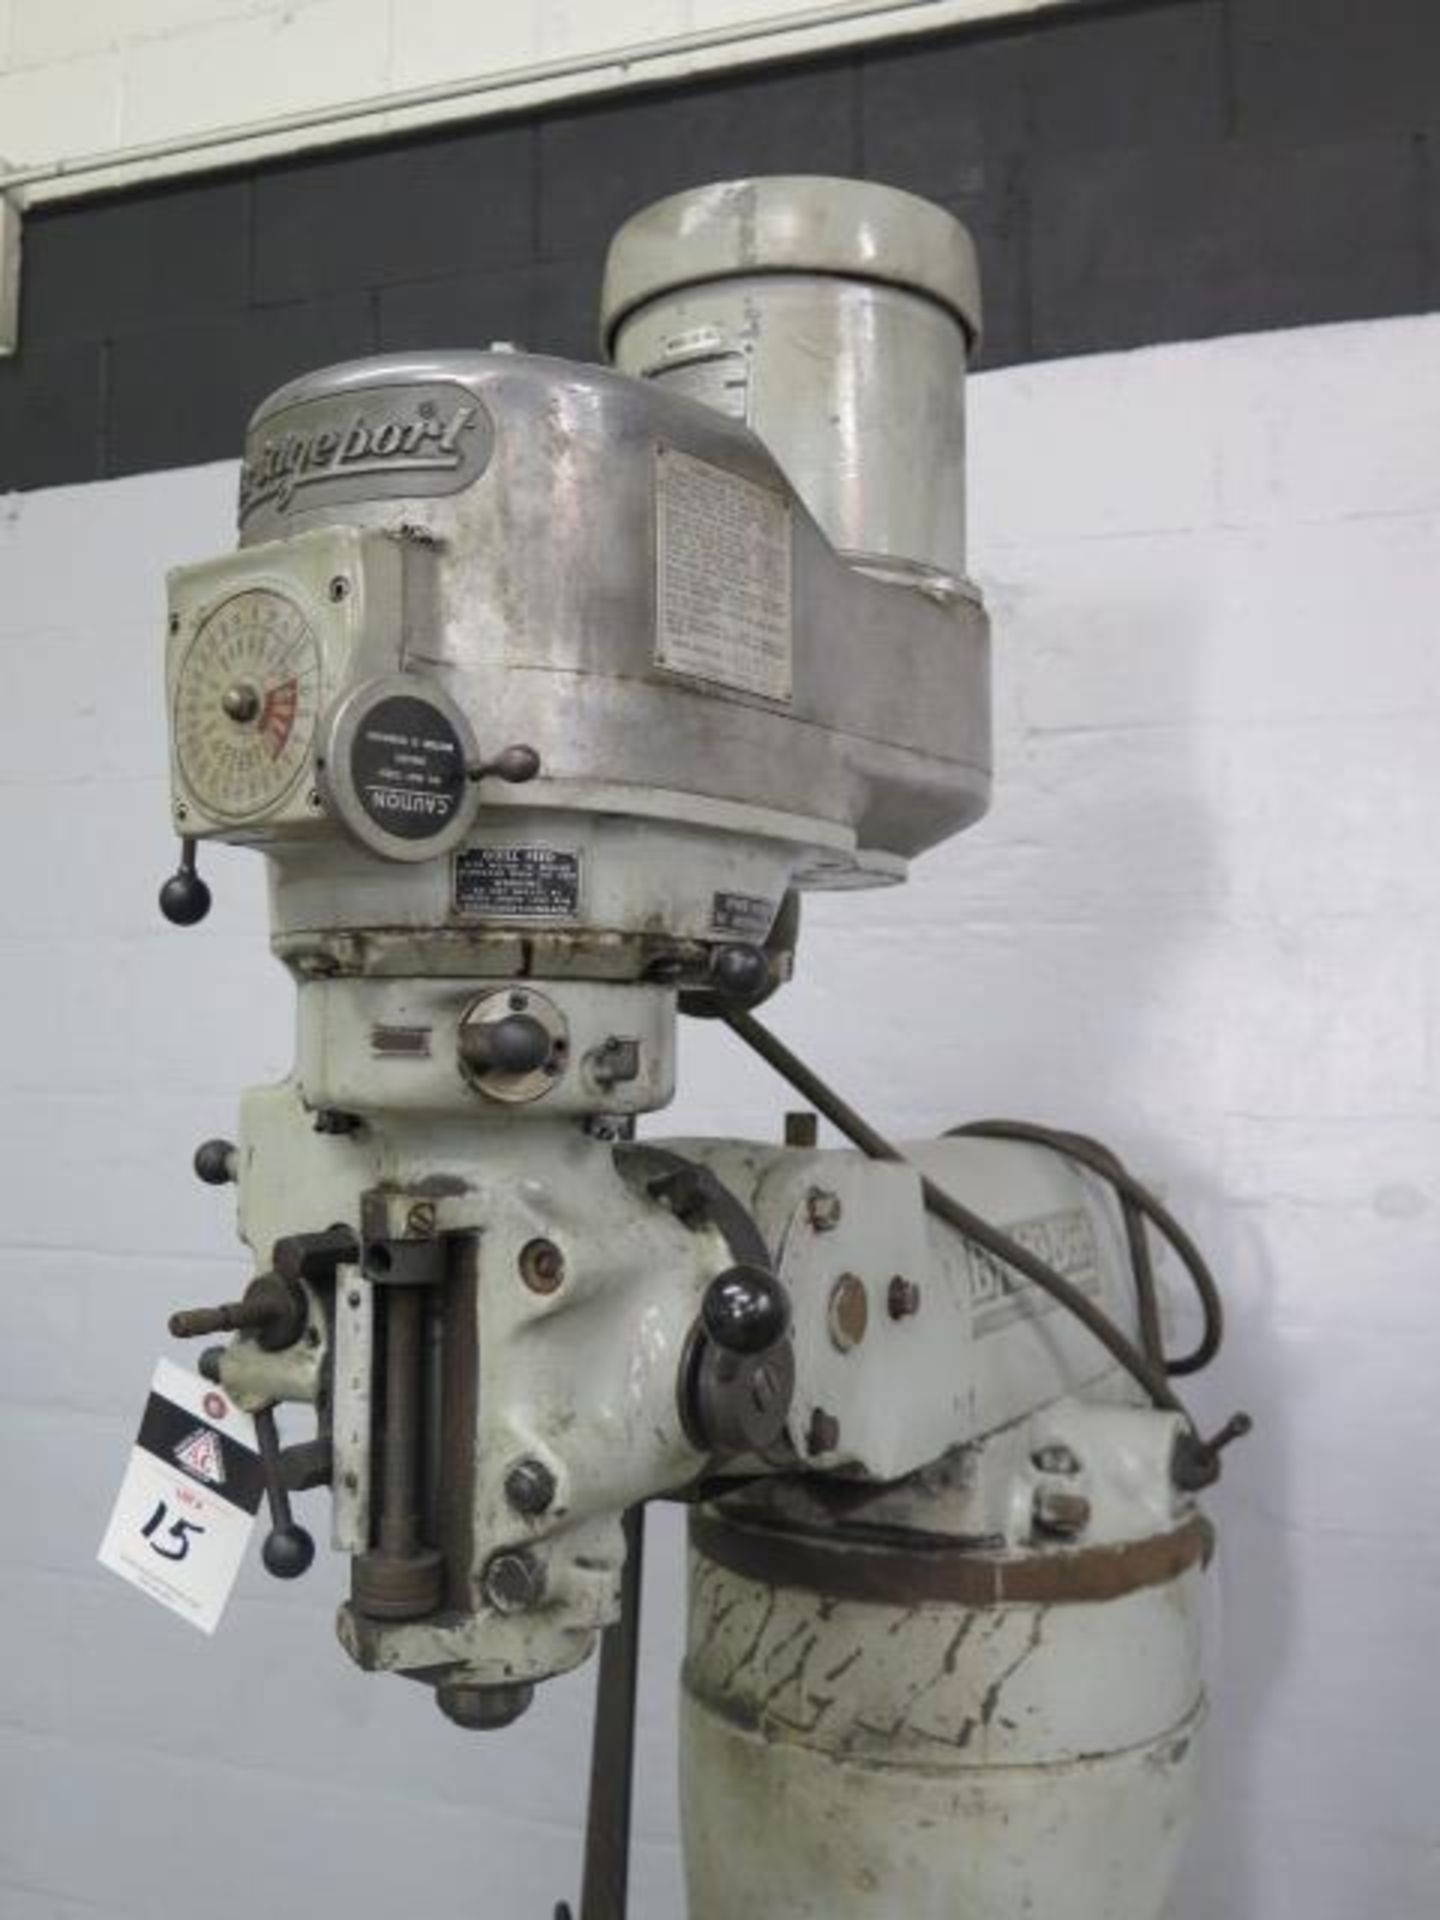 Bridgeport Vertical Mill w/ 1.5Hp Motor, 4” Riser, 9” x 42” Table (SOLD AS-IS - NO WARRANTY) - Image 4 of 11